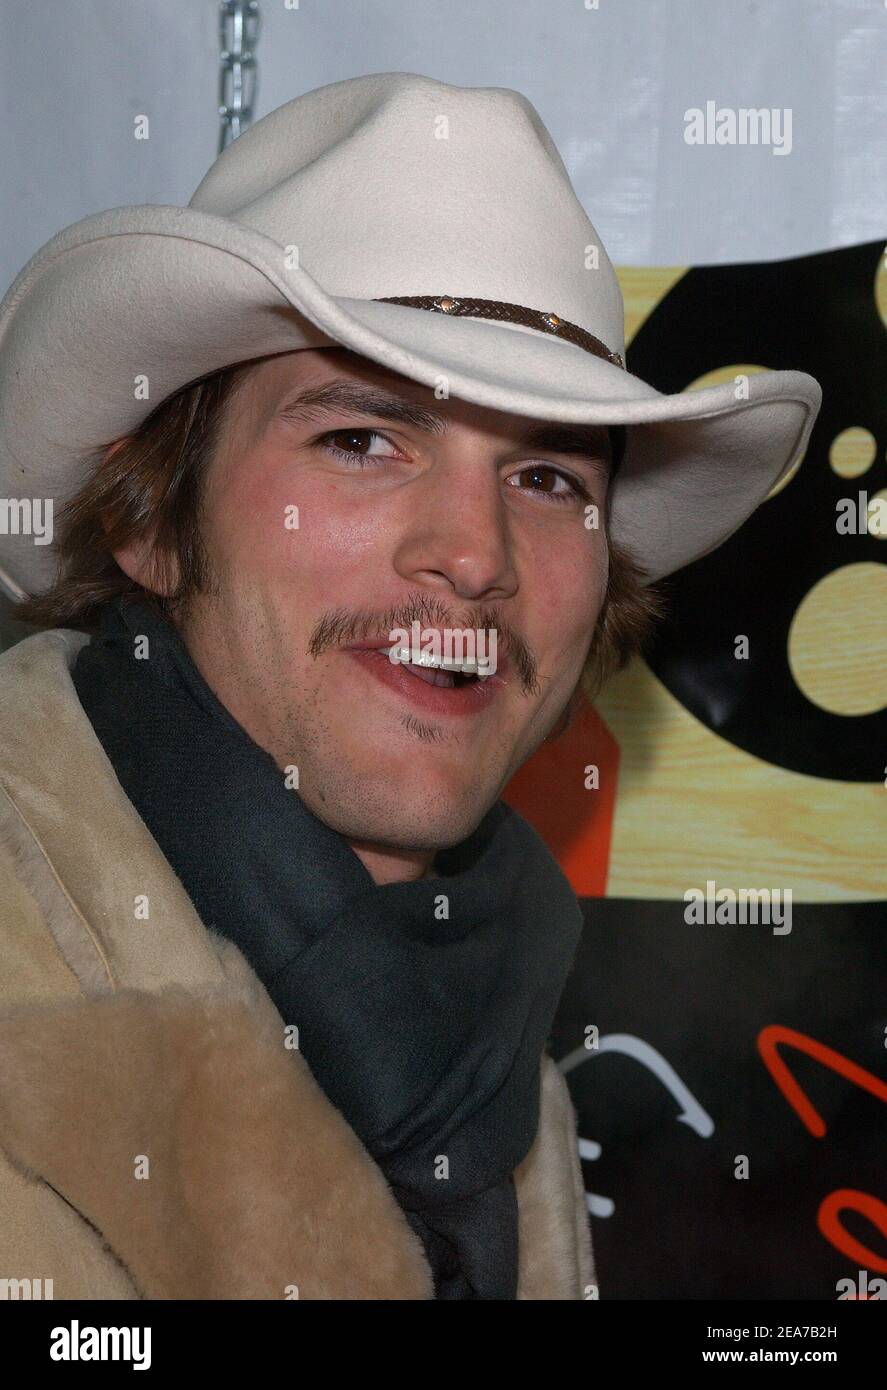 Ashton Kutcher attends the screening of The Butterfly Effect at the Eccles Theatre during the 2004 Sundance Film Festival. Park City, January 17, 2004. (Pictured: Ashton Kutcher). Photo by Lionel Hahn/Abaca. Stock Photo